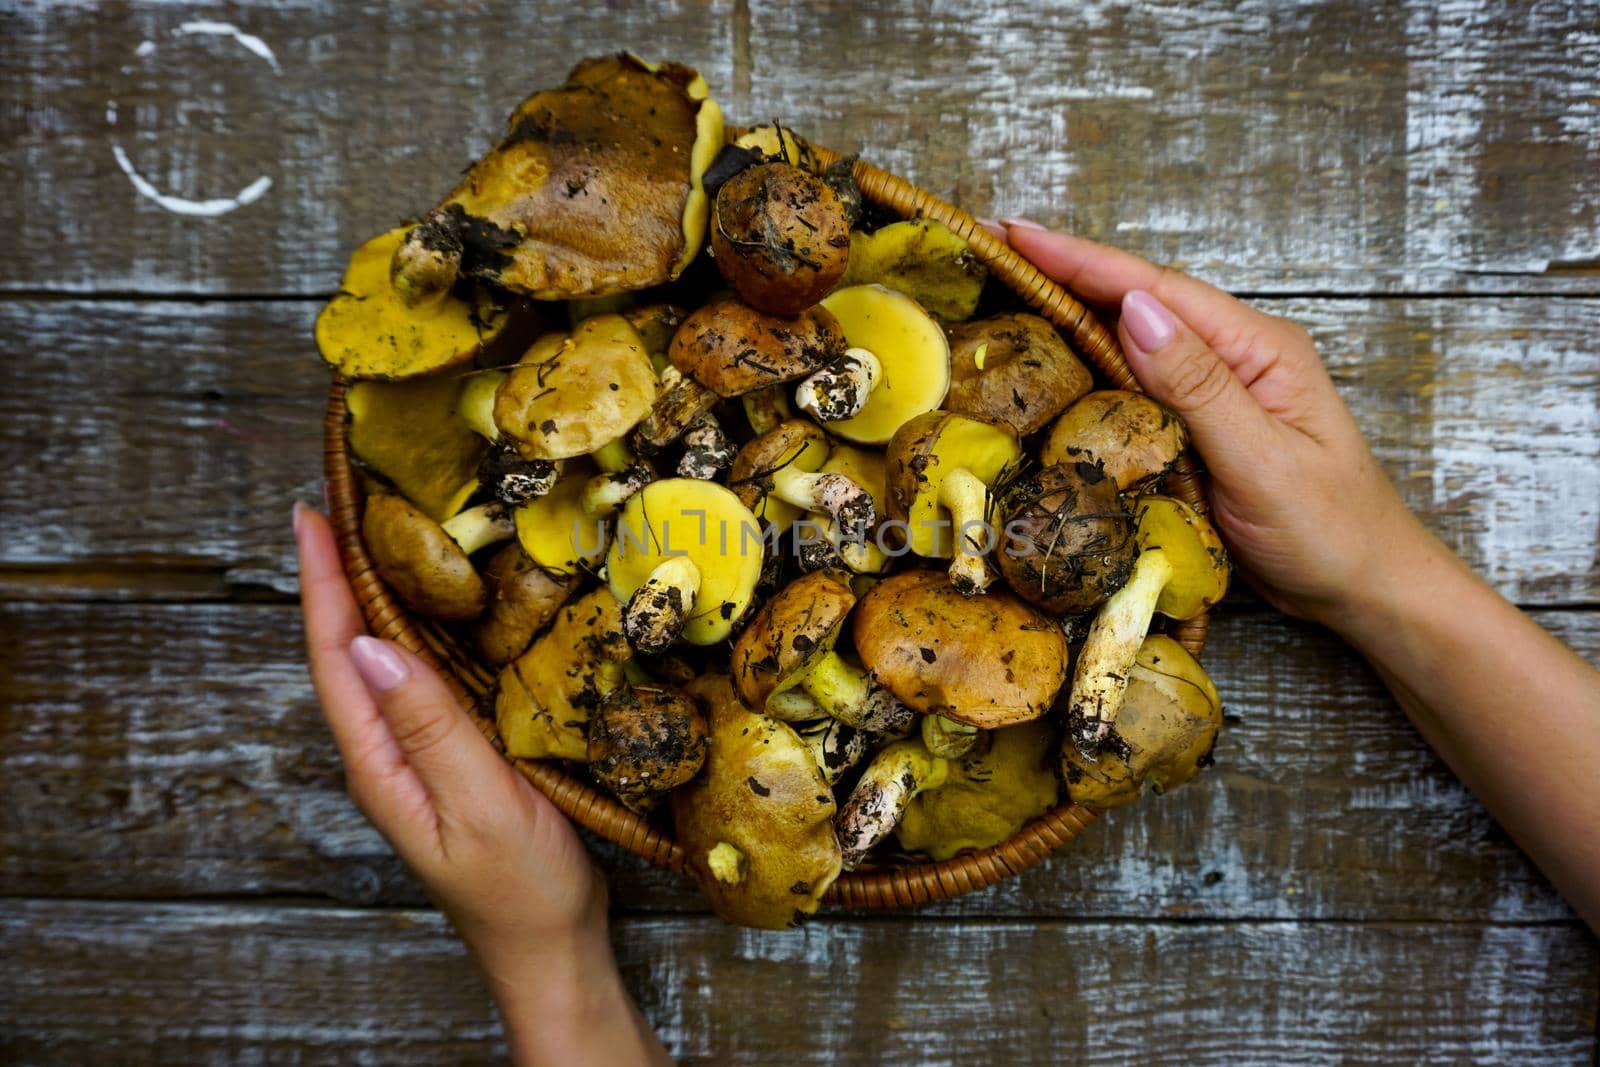 Women's hands hold a basket with freshly picked mushrooms. High quality photo